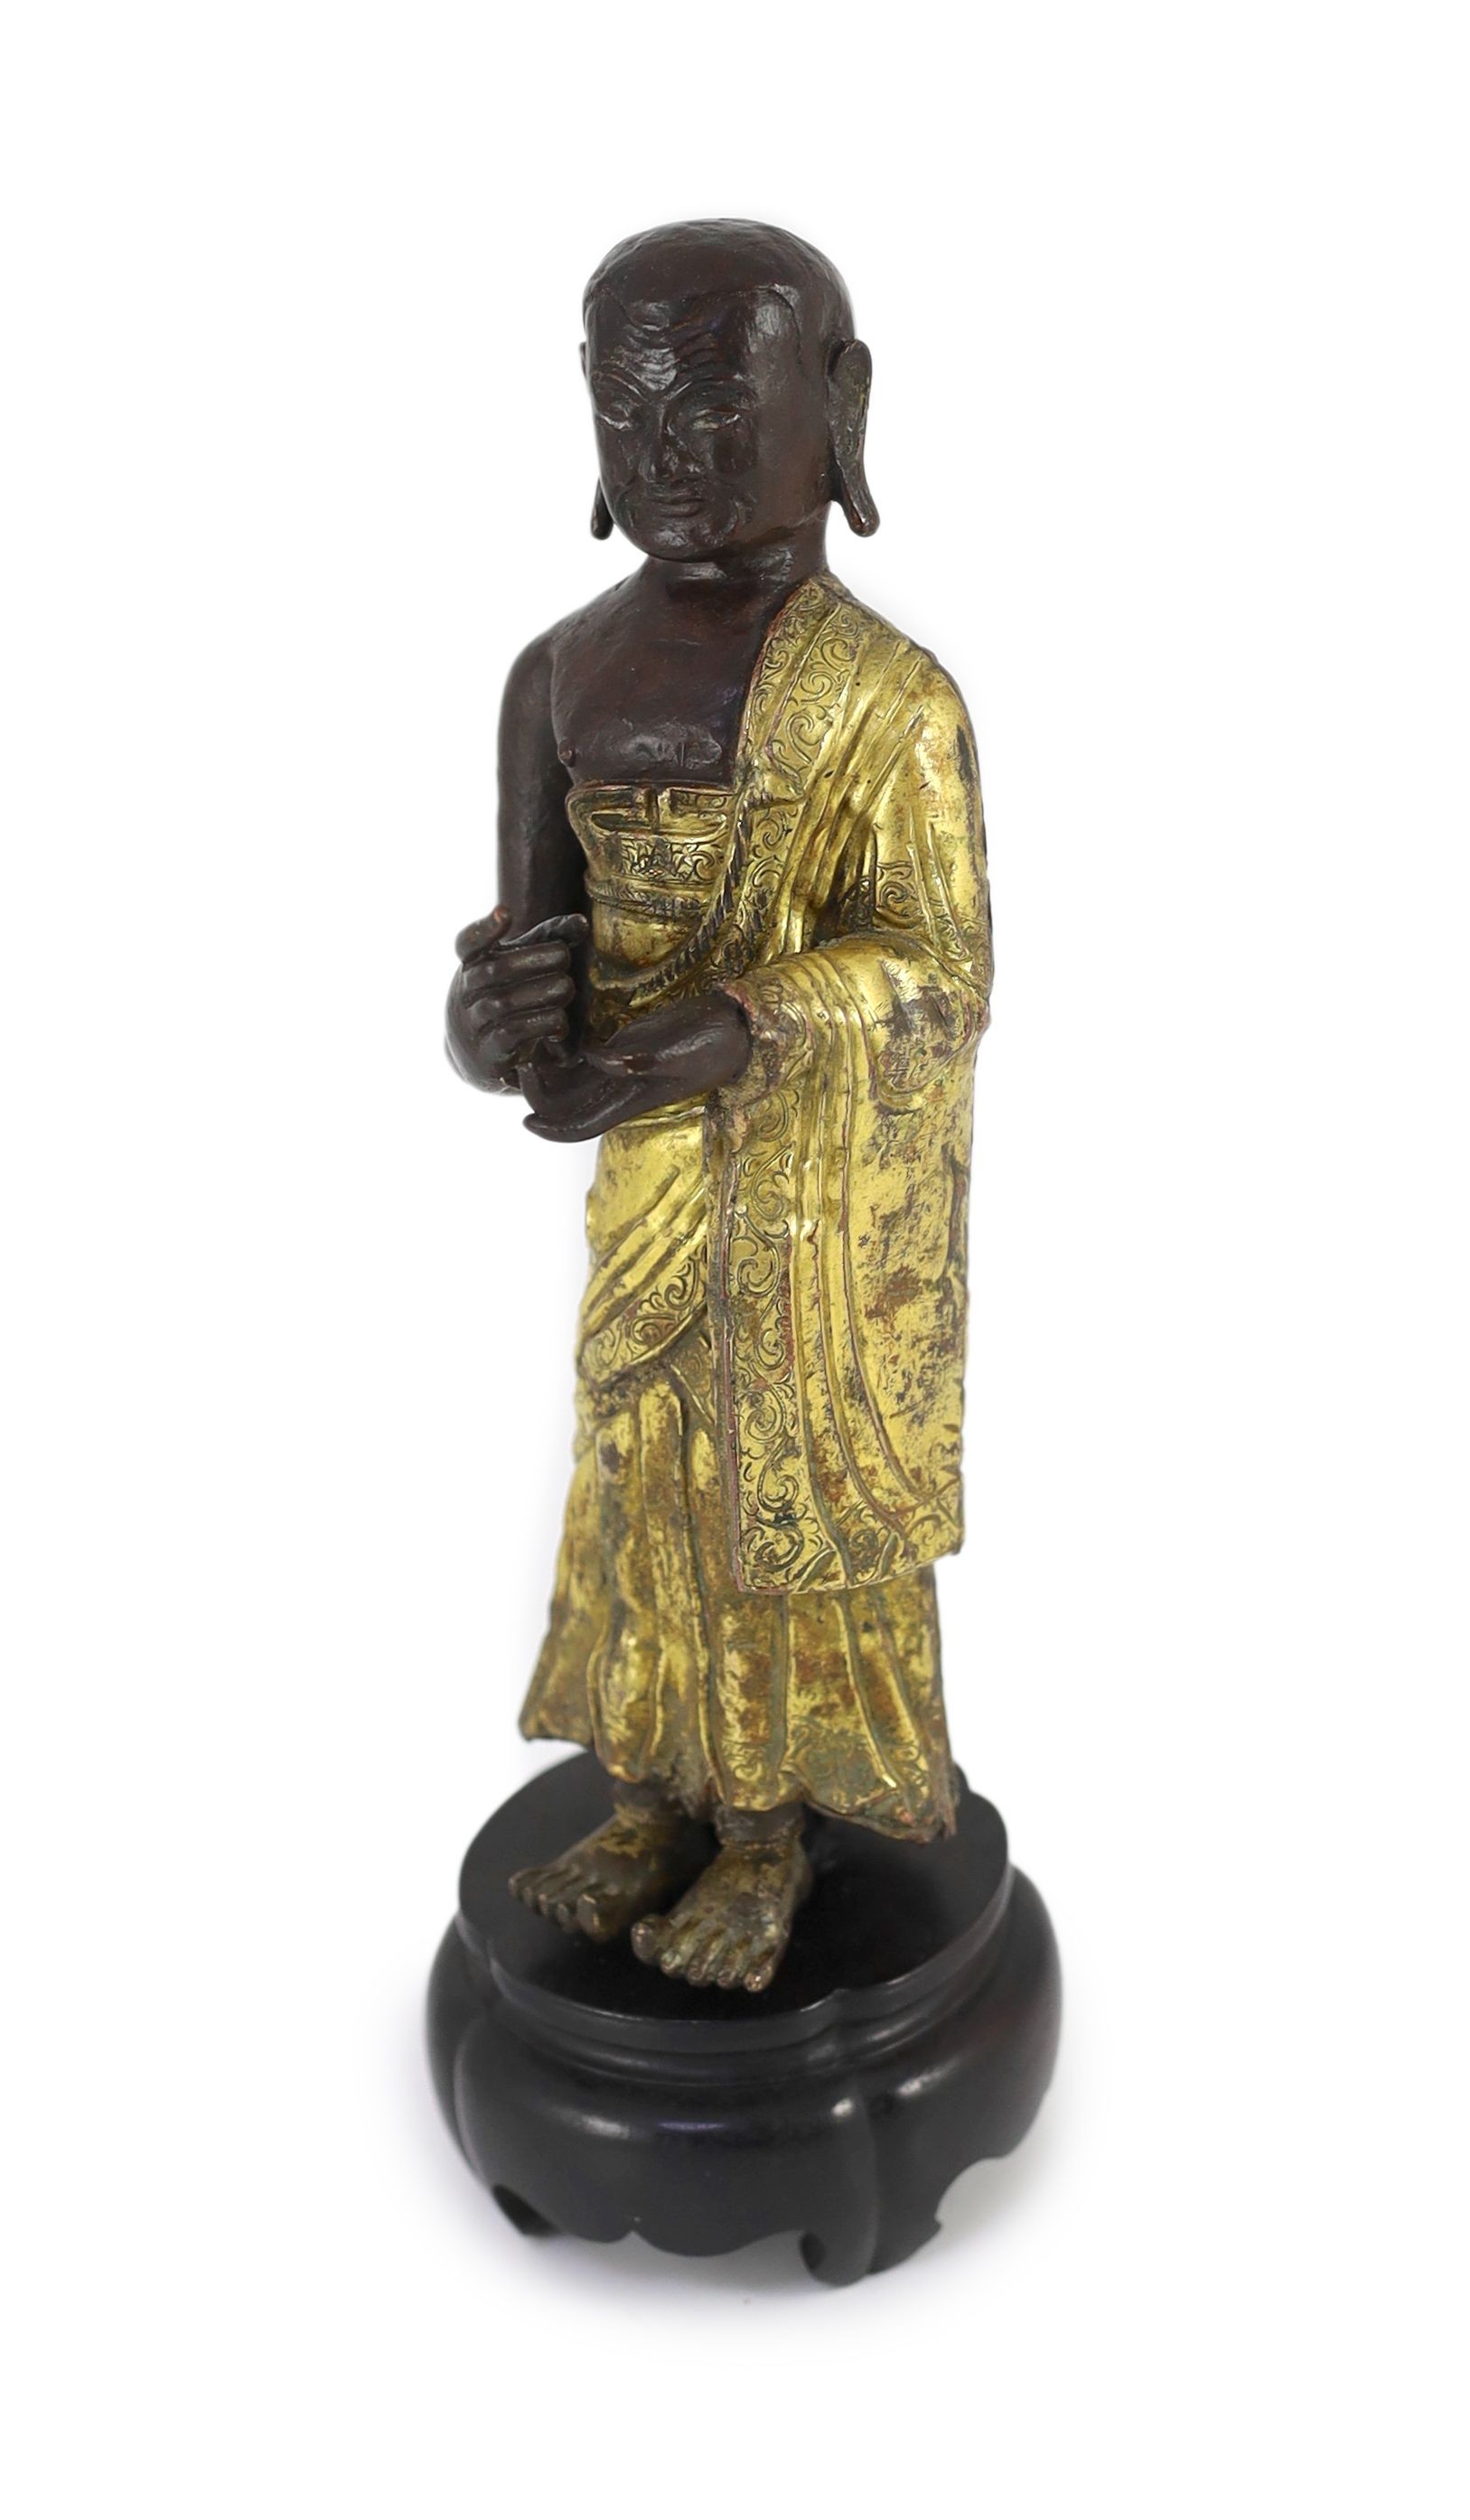 A Tibetan repousse work gilt and lacquered copper figure of a luohan, 18th century, 20.5 cm high, wood stand